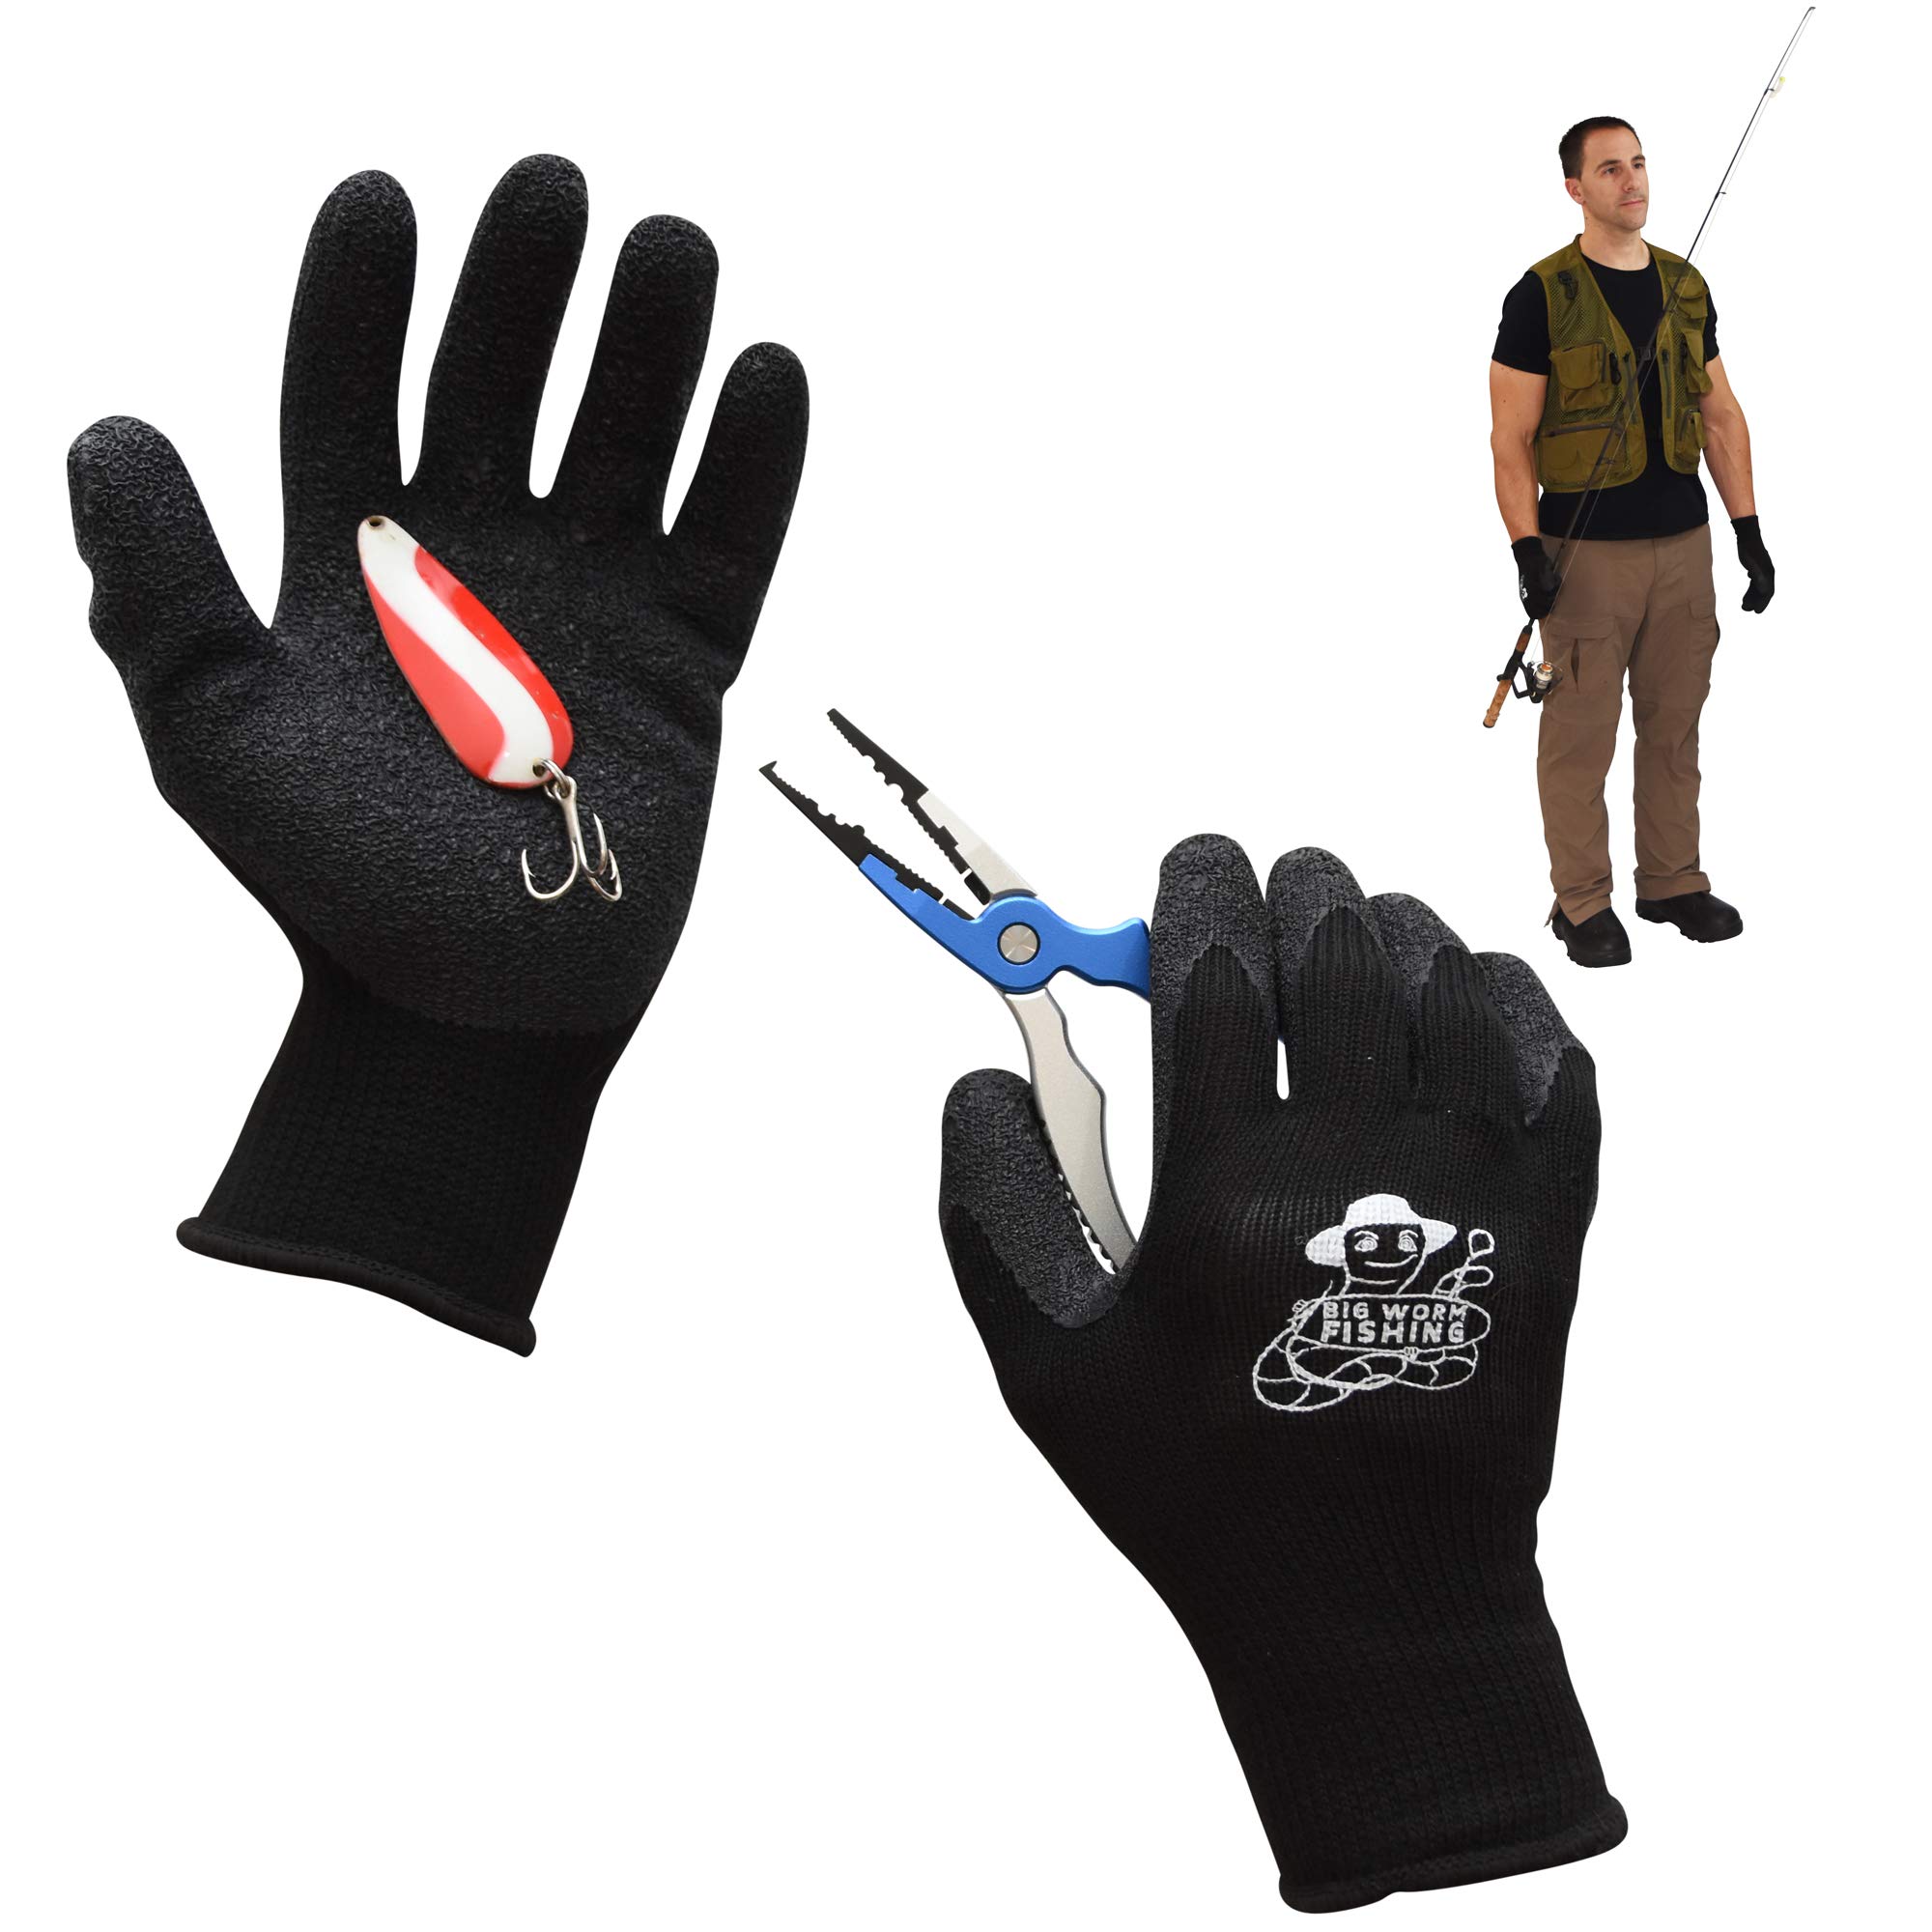 Big Worm Fishing Fish Handling/Cleaning Gloves Textured Grip Palm Soft  Lining Fillet Gloves - One Size Fits Most L to XL